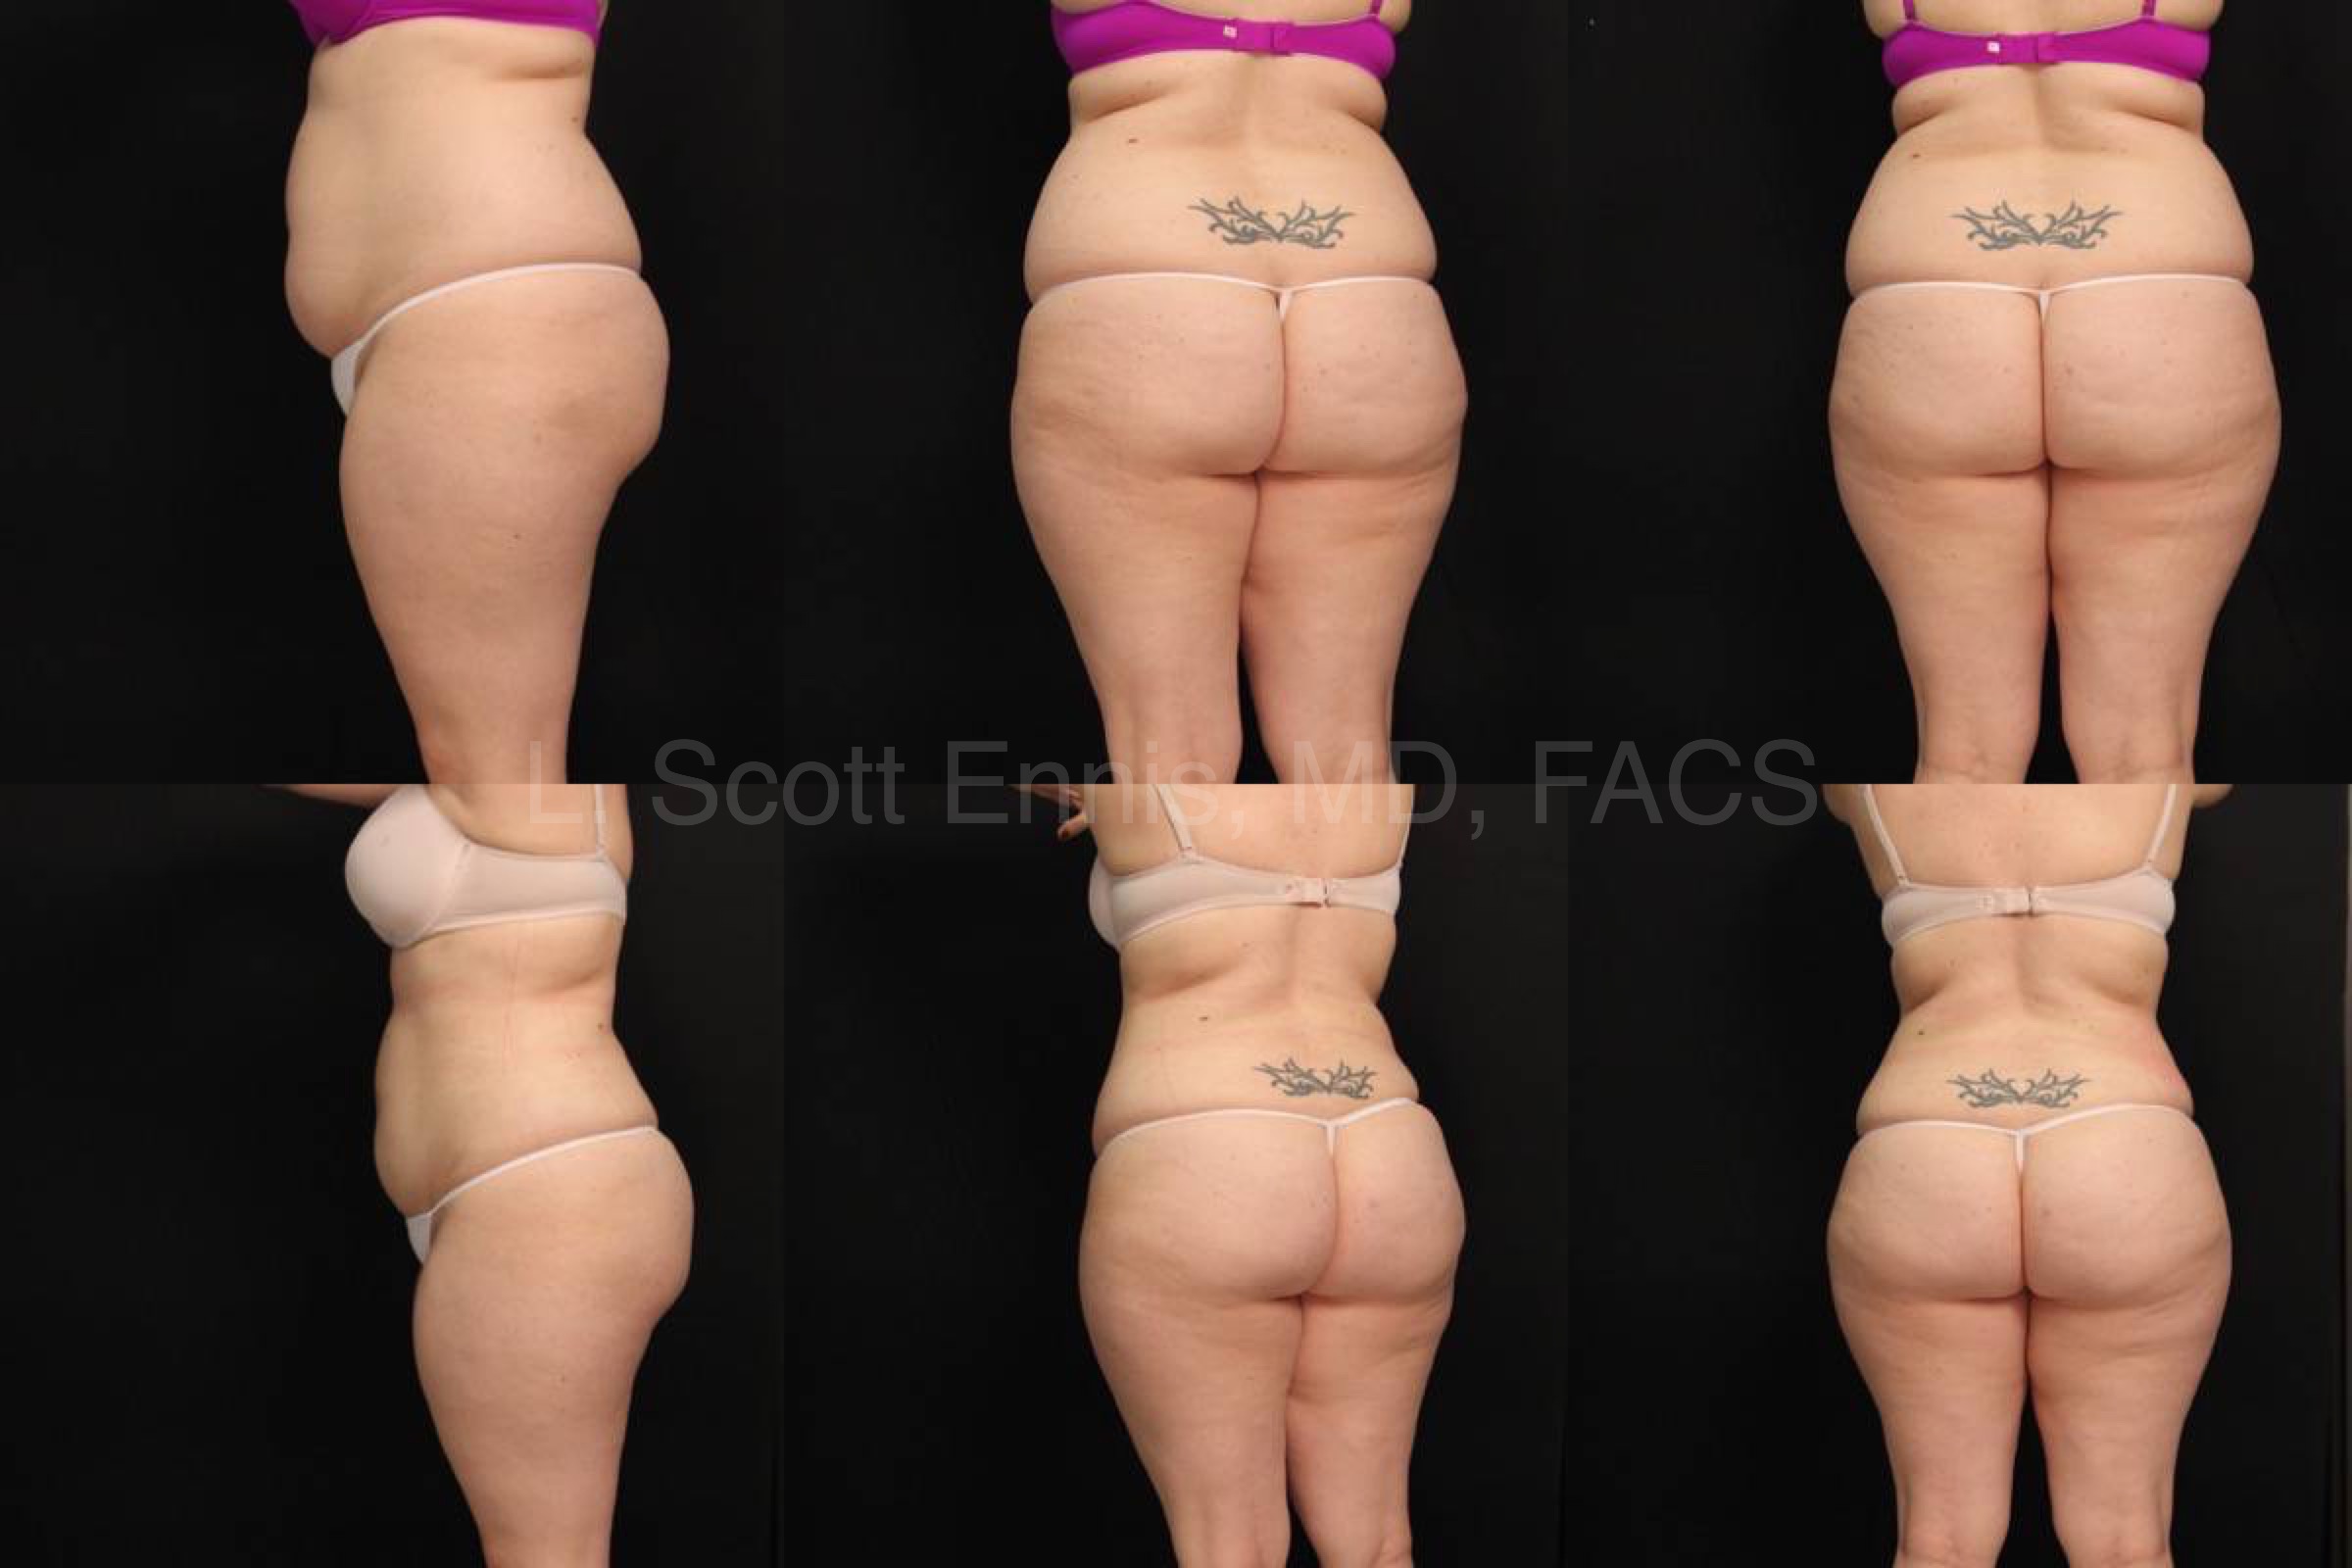 Liposuction of Abdomen and Hips 32yo 5_6_ 190lb Before and After Ennis Plastic Surgery Palm Beach Boca Raton Destin Miami Fort Lauderdale